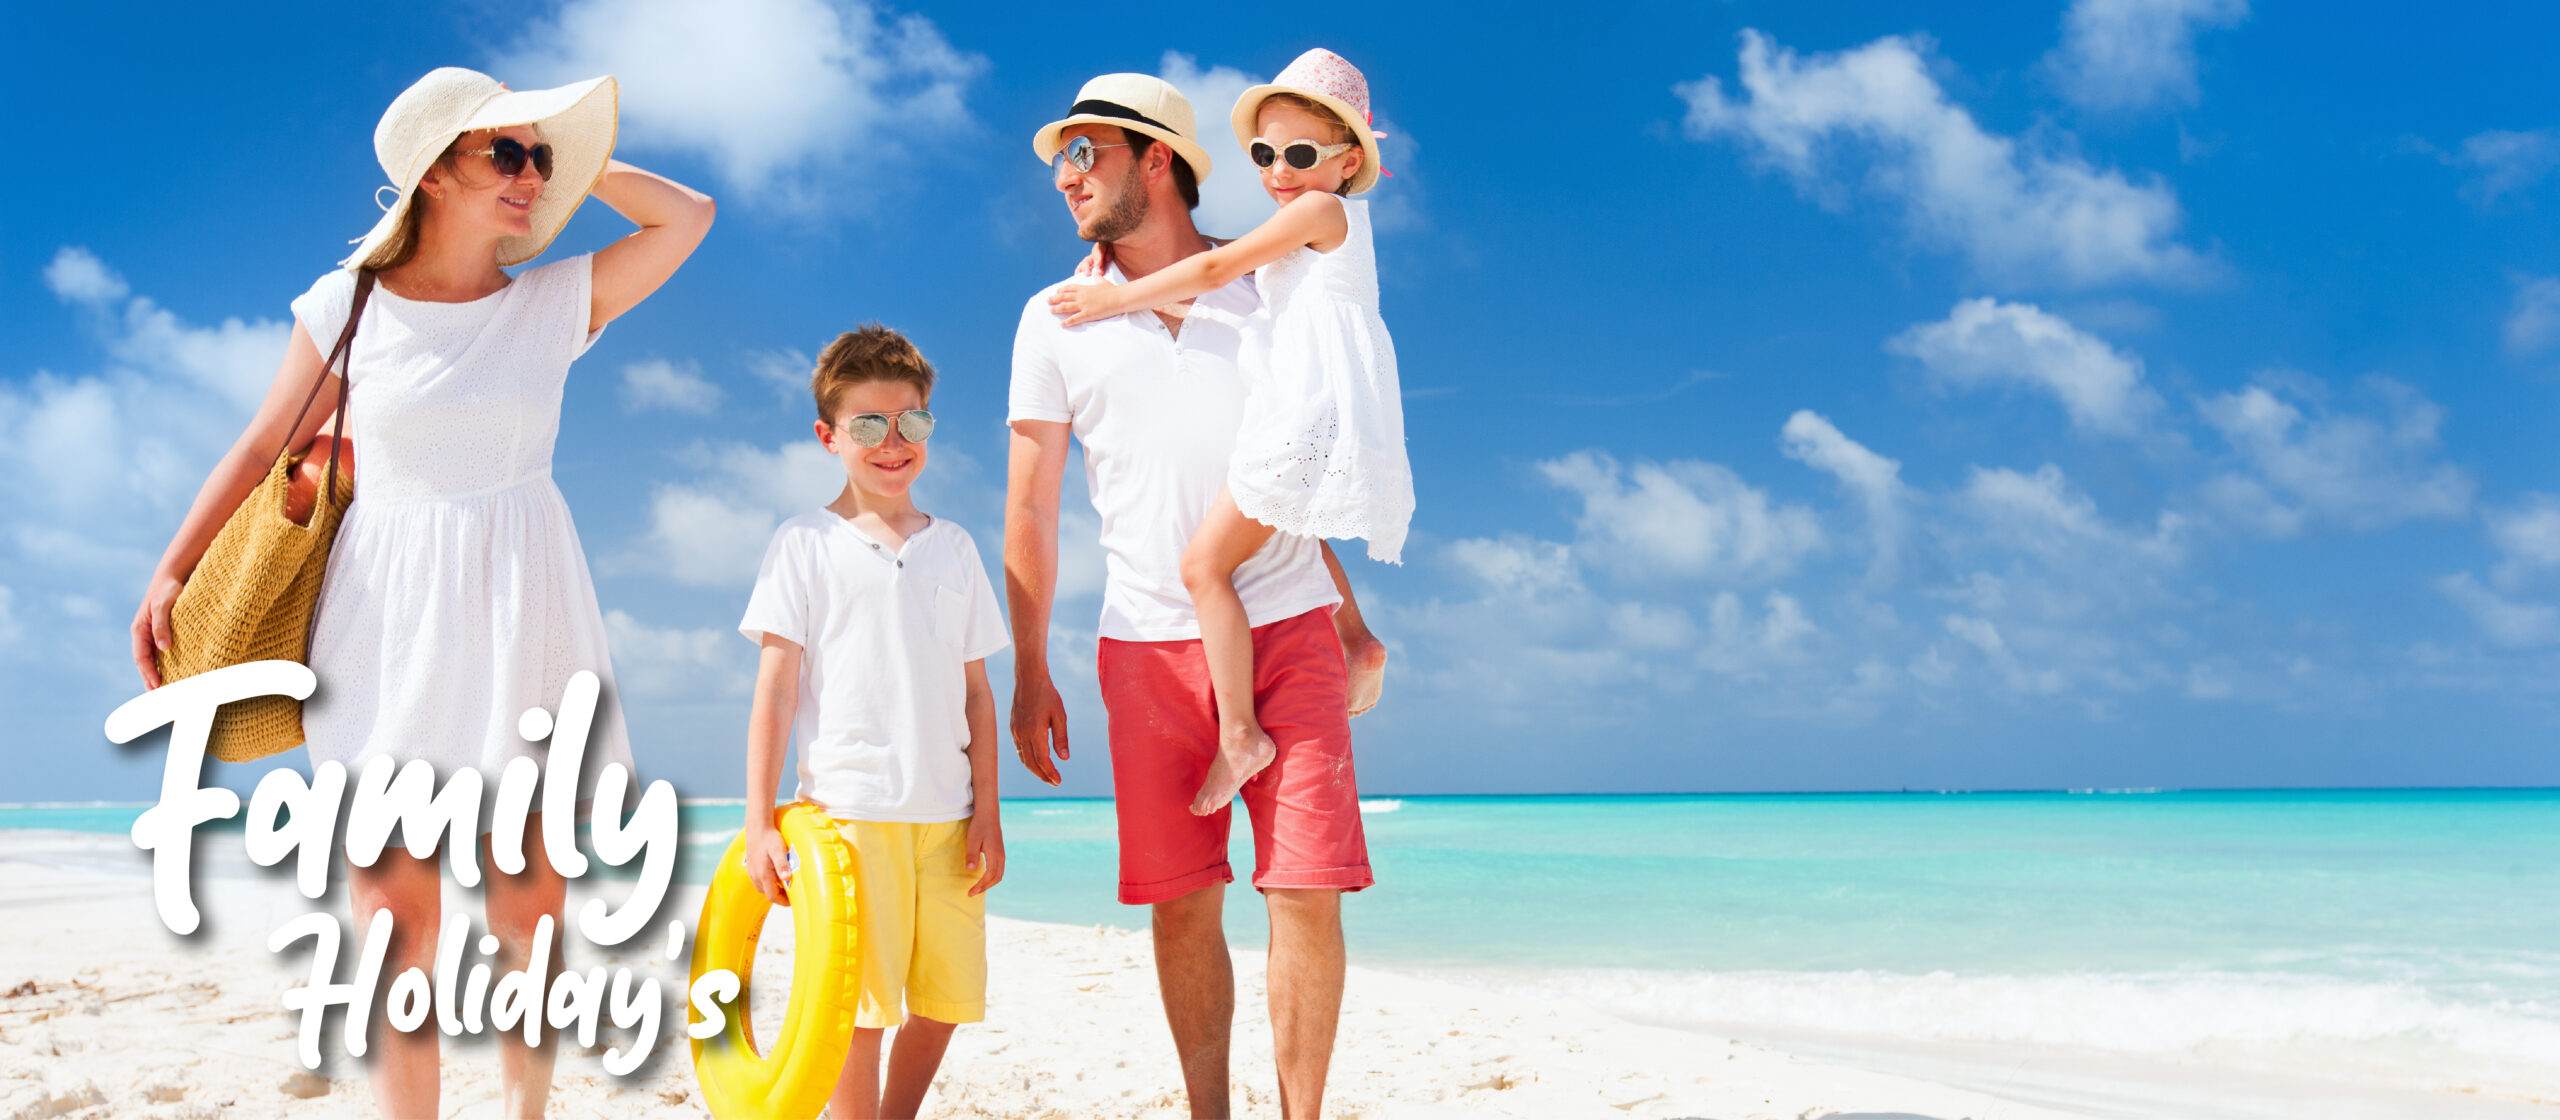 Family Holiday’s Experience It Now Travel